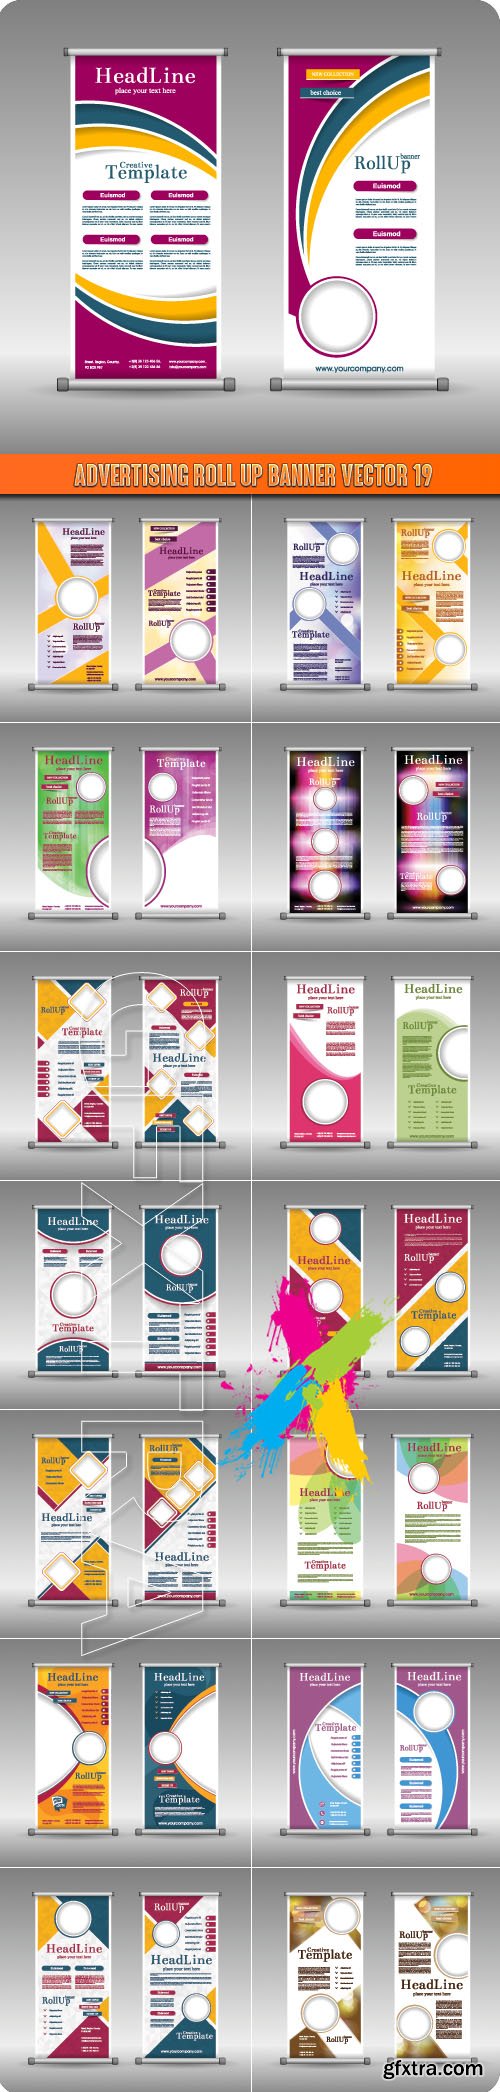 Advertising Roll up banner vector 19